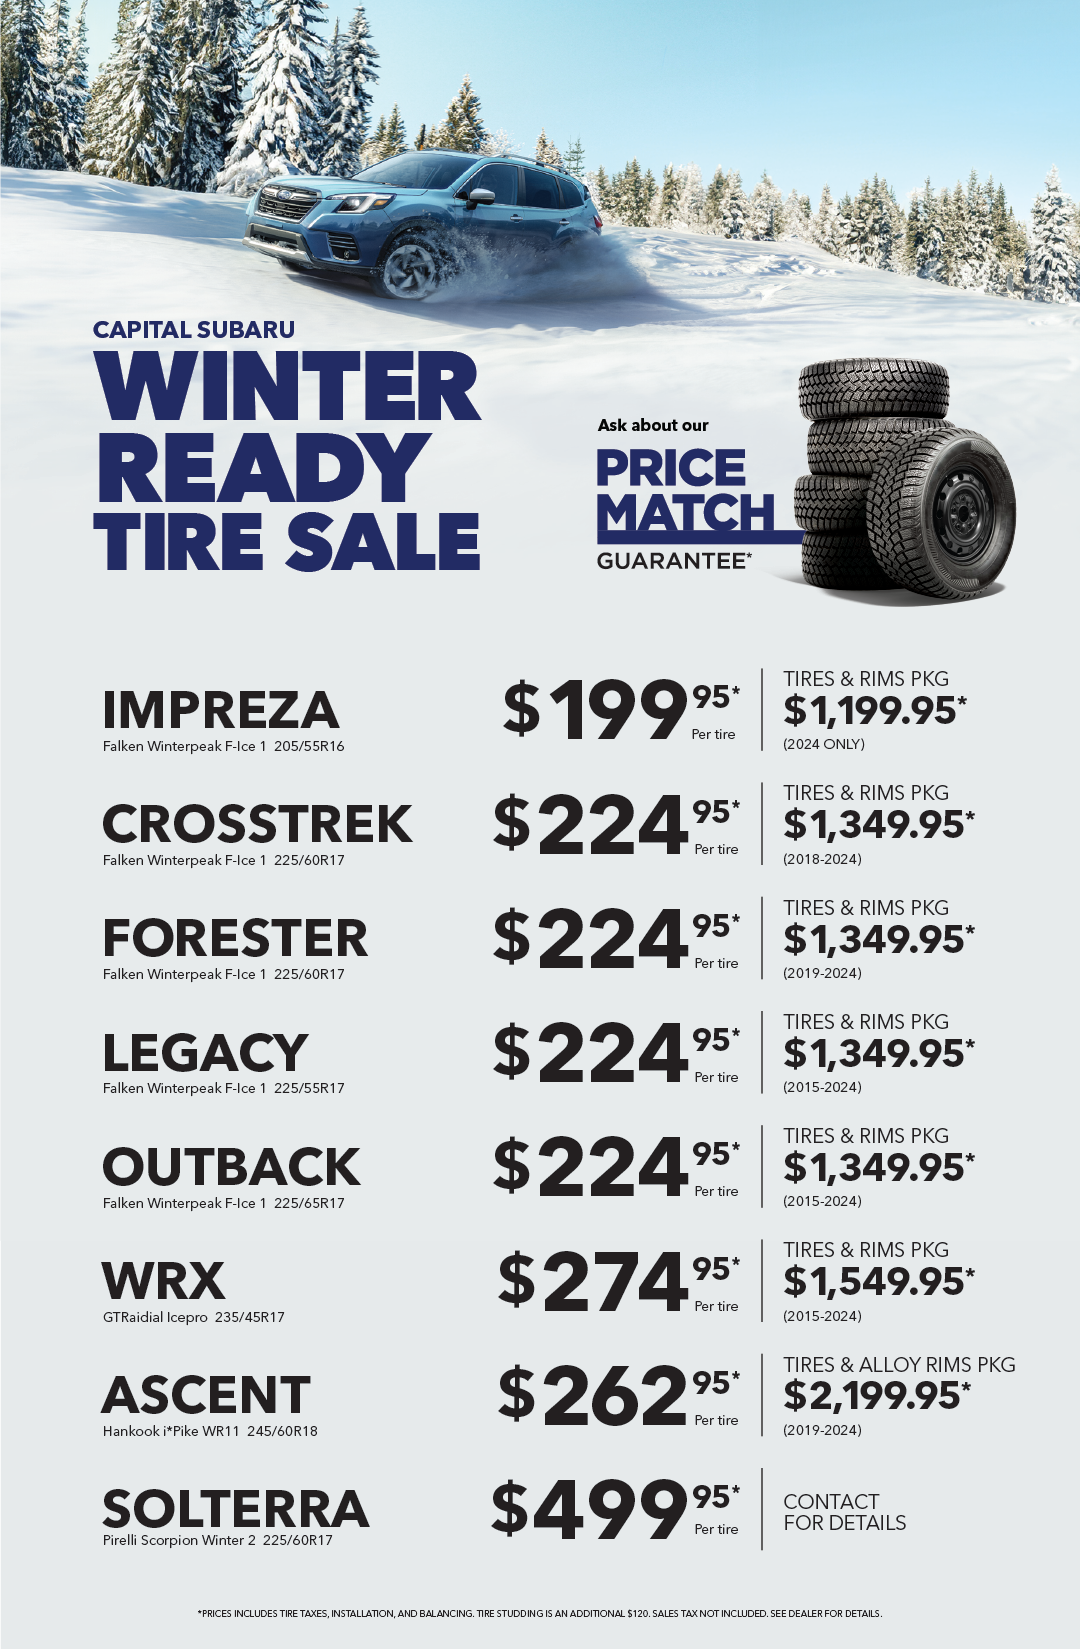 Get Ready for the Winter Sale!